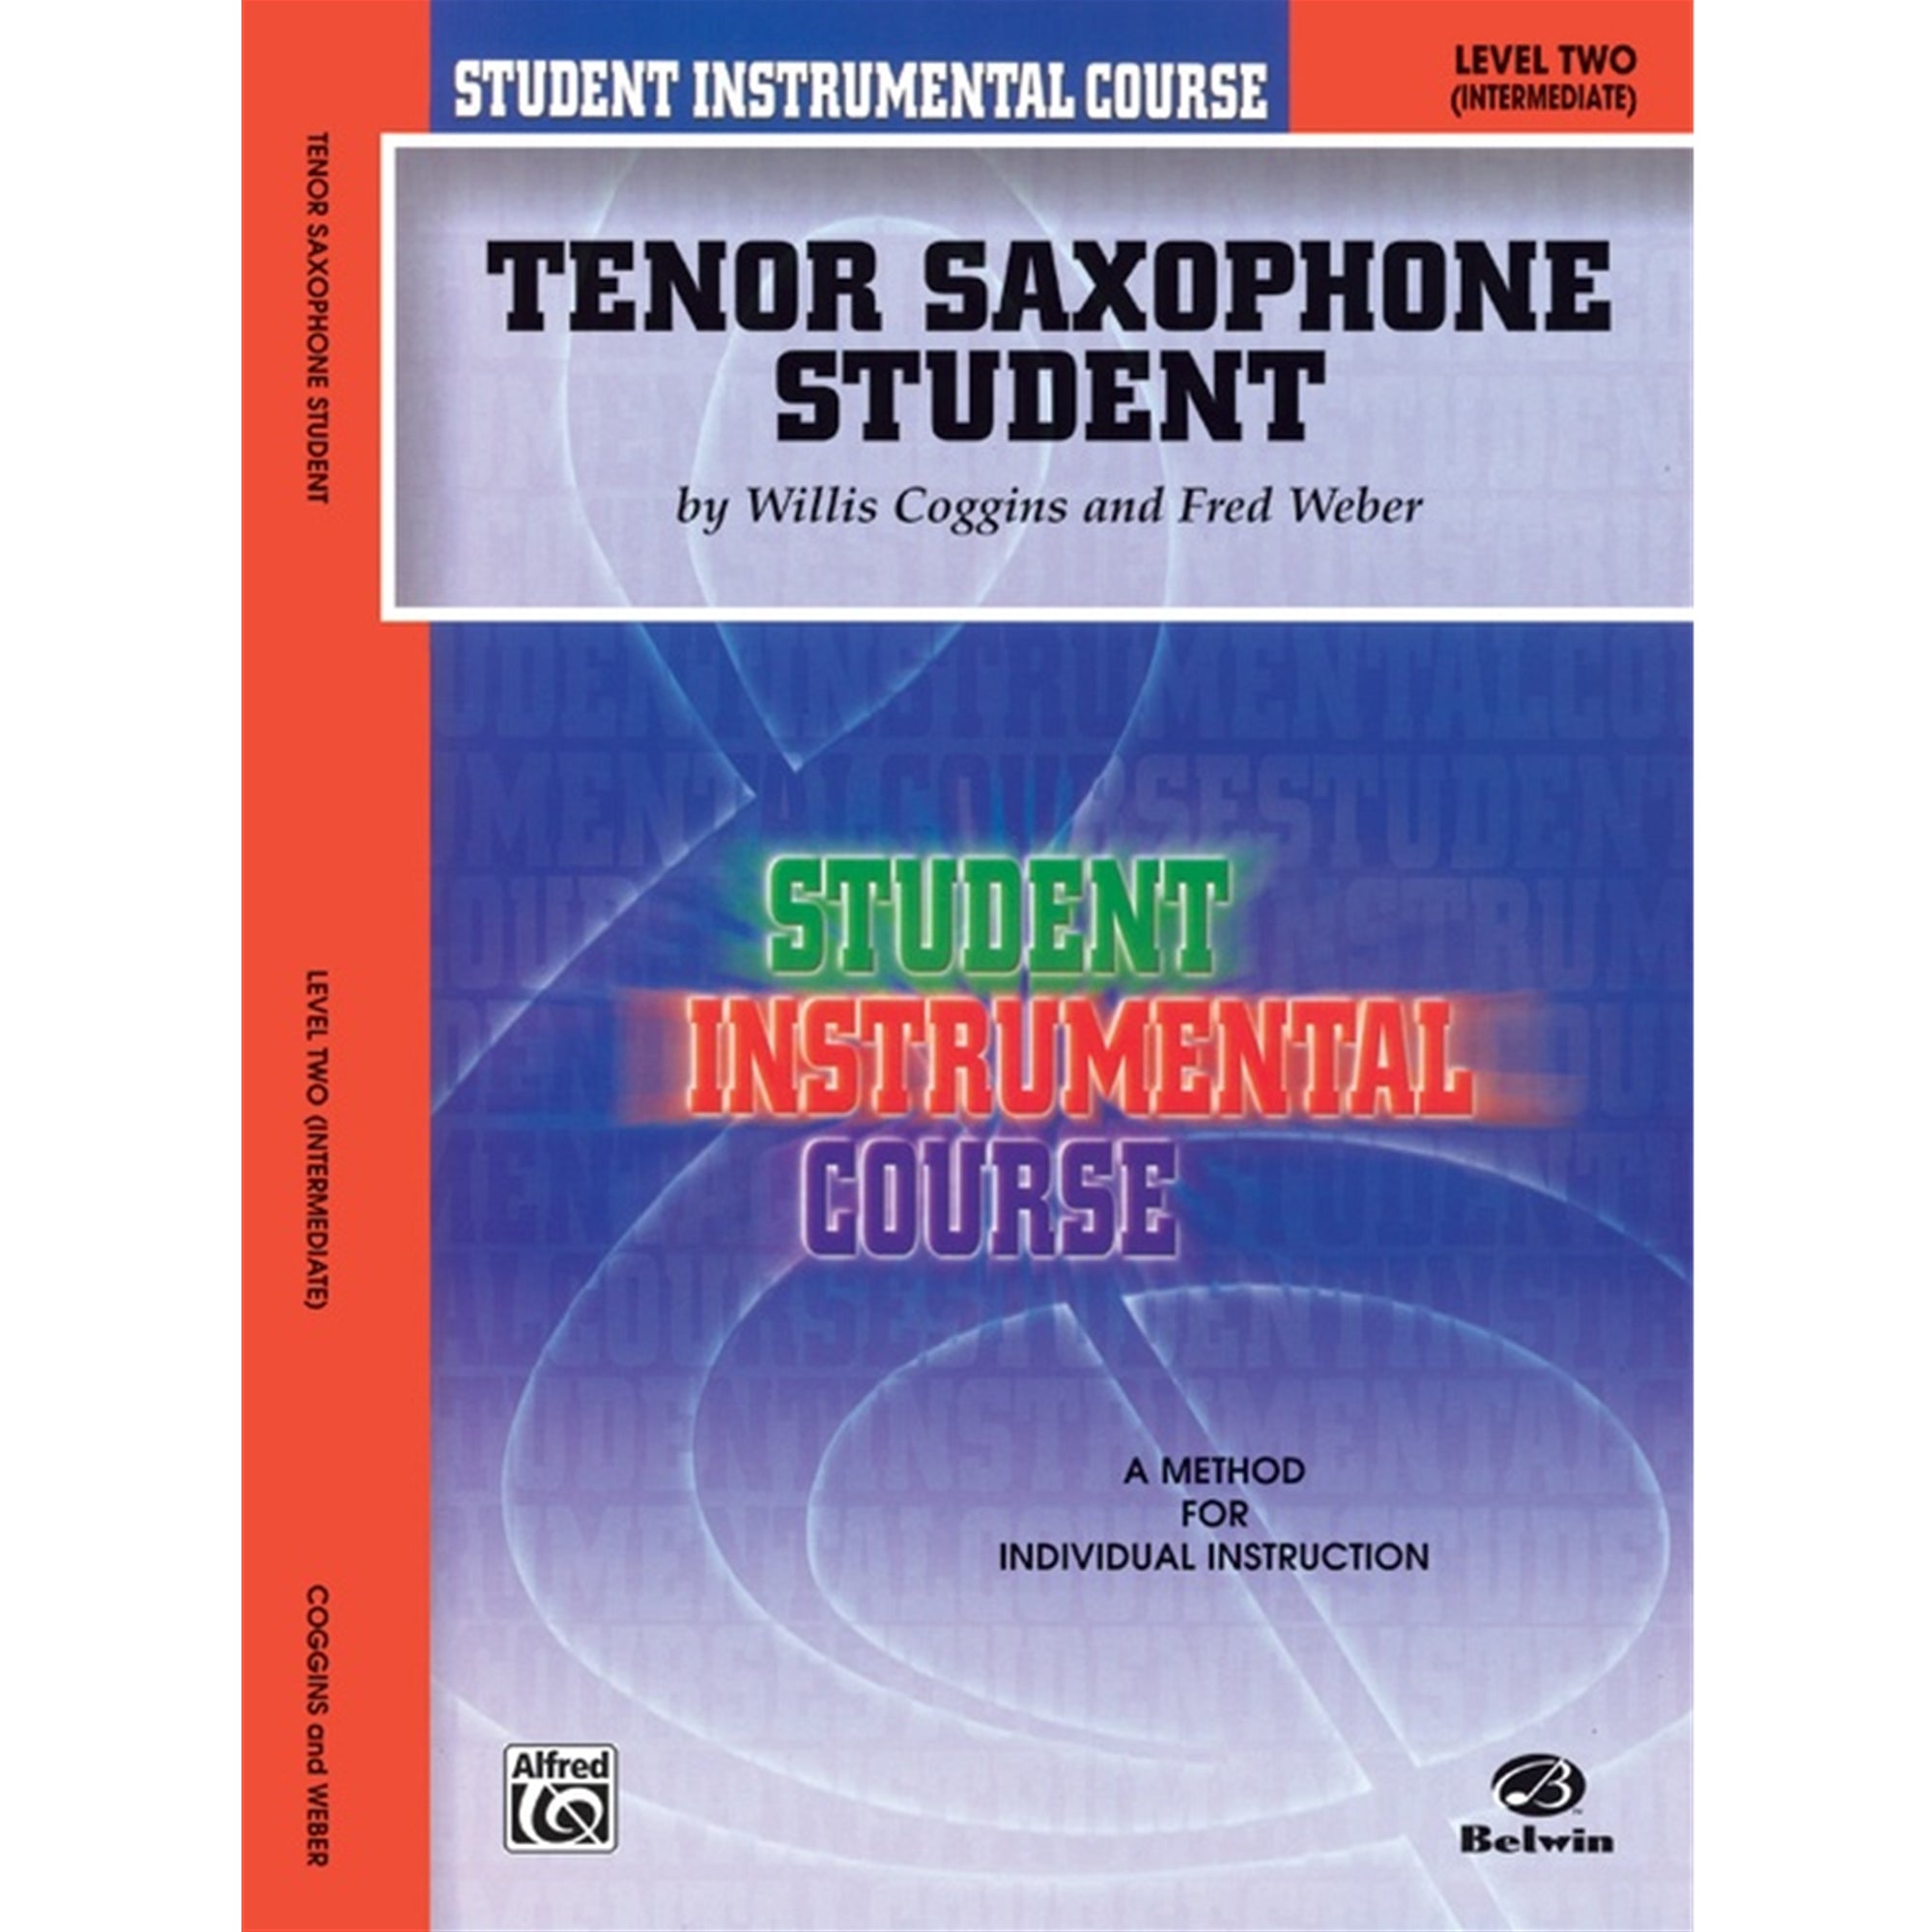 ALFRED BIC00236A Student Instrumental Course: Tenor Saxophone Student, Level II [Saxophone]